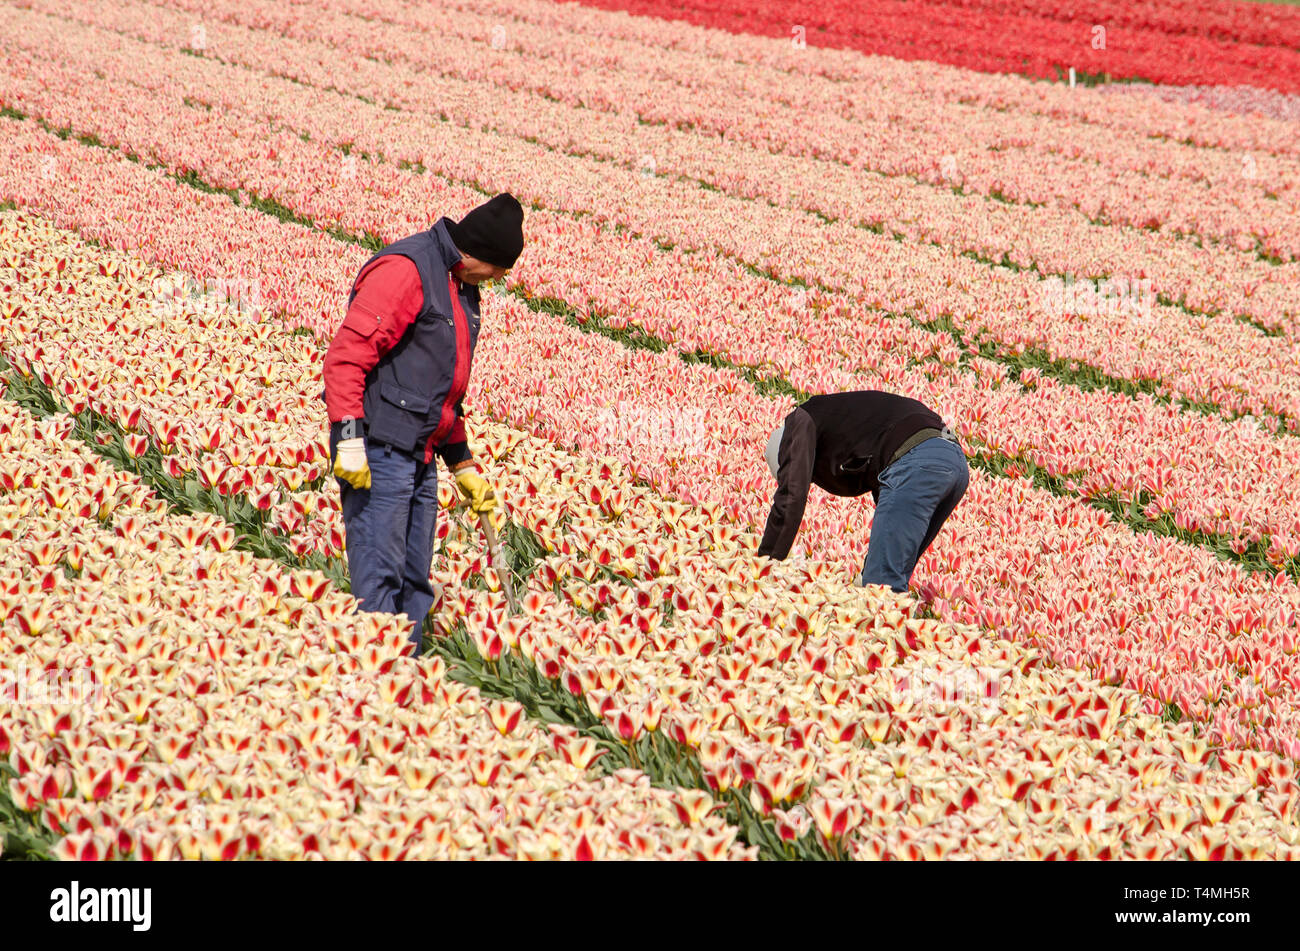 Noordwijkerhout, The Netherlands, April 15, 2019: two labourers at work in red and pink tulip fields Stock Photo